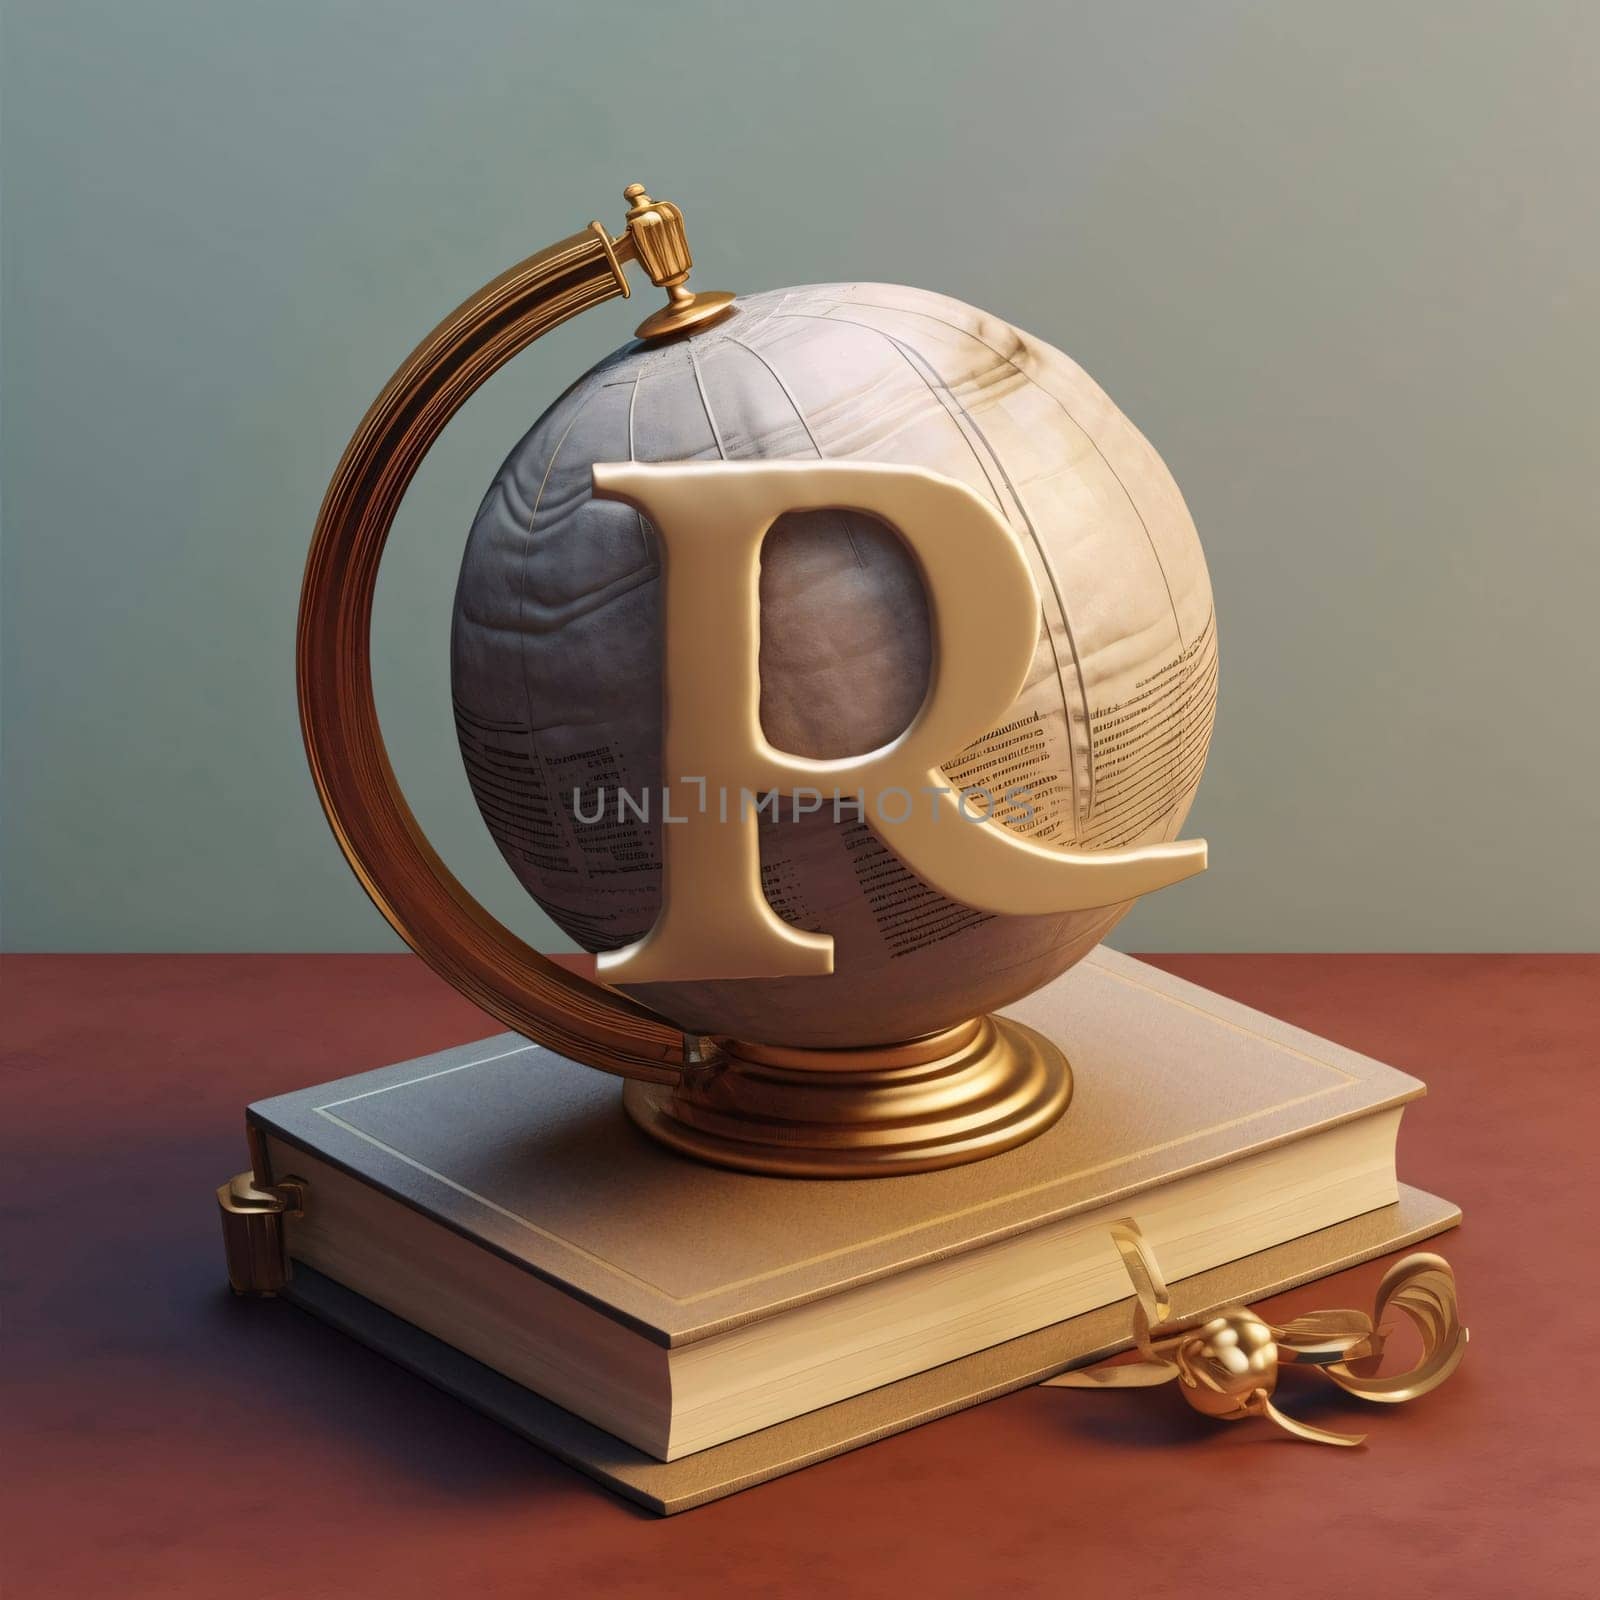 The letter R in the alphabet on the globe. 3D rendering by ThemesS